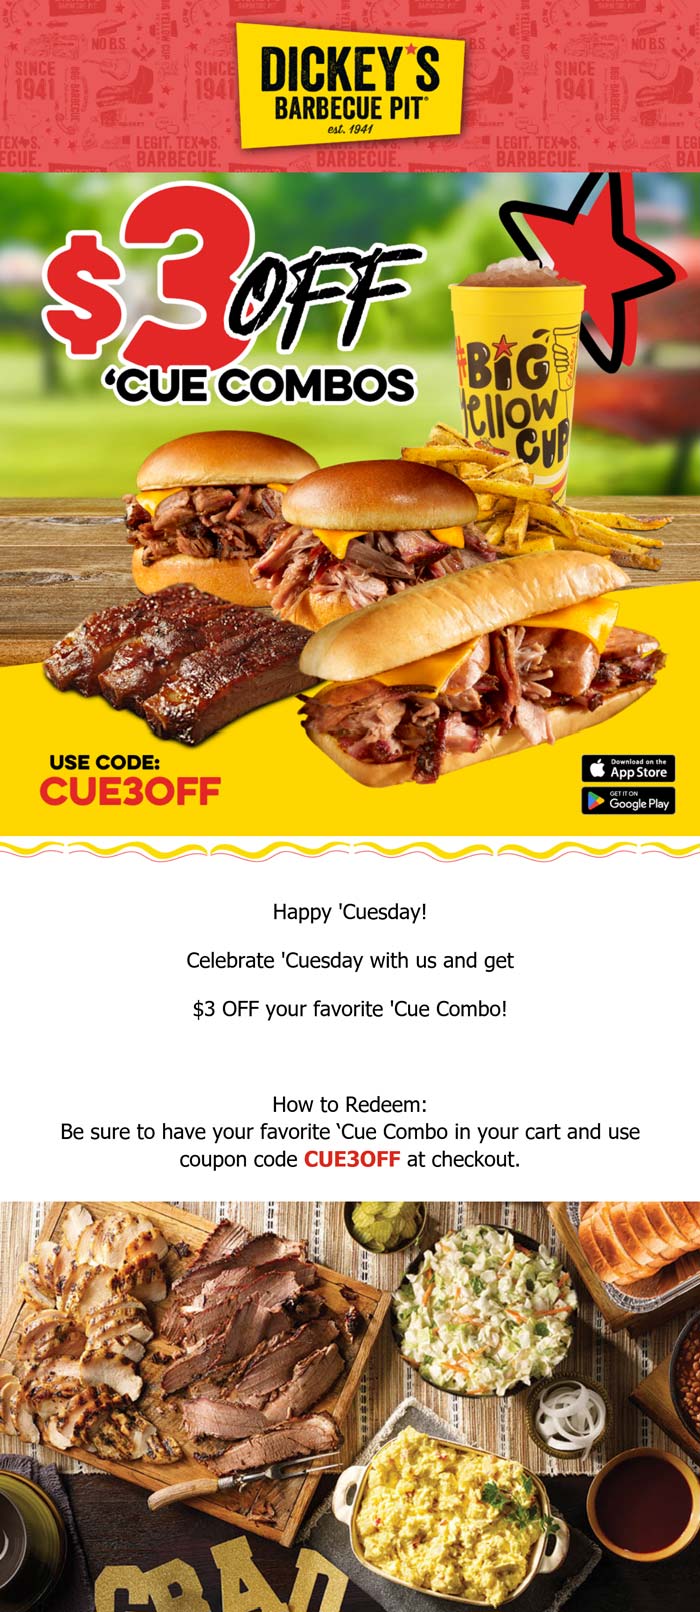 Dickeys Barbecue Pit restaurants Coupon  $3 off combo meals today at Dickeys Barbecue Pit via promo code CUE3OFF #dickeysbarbecuepit 